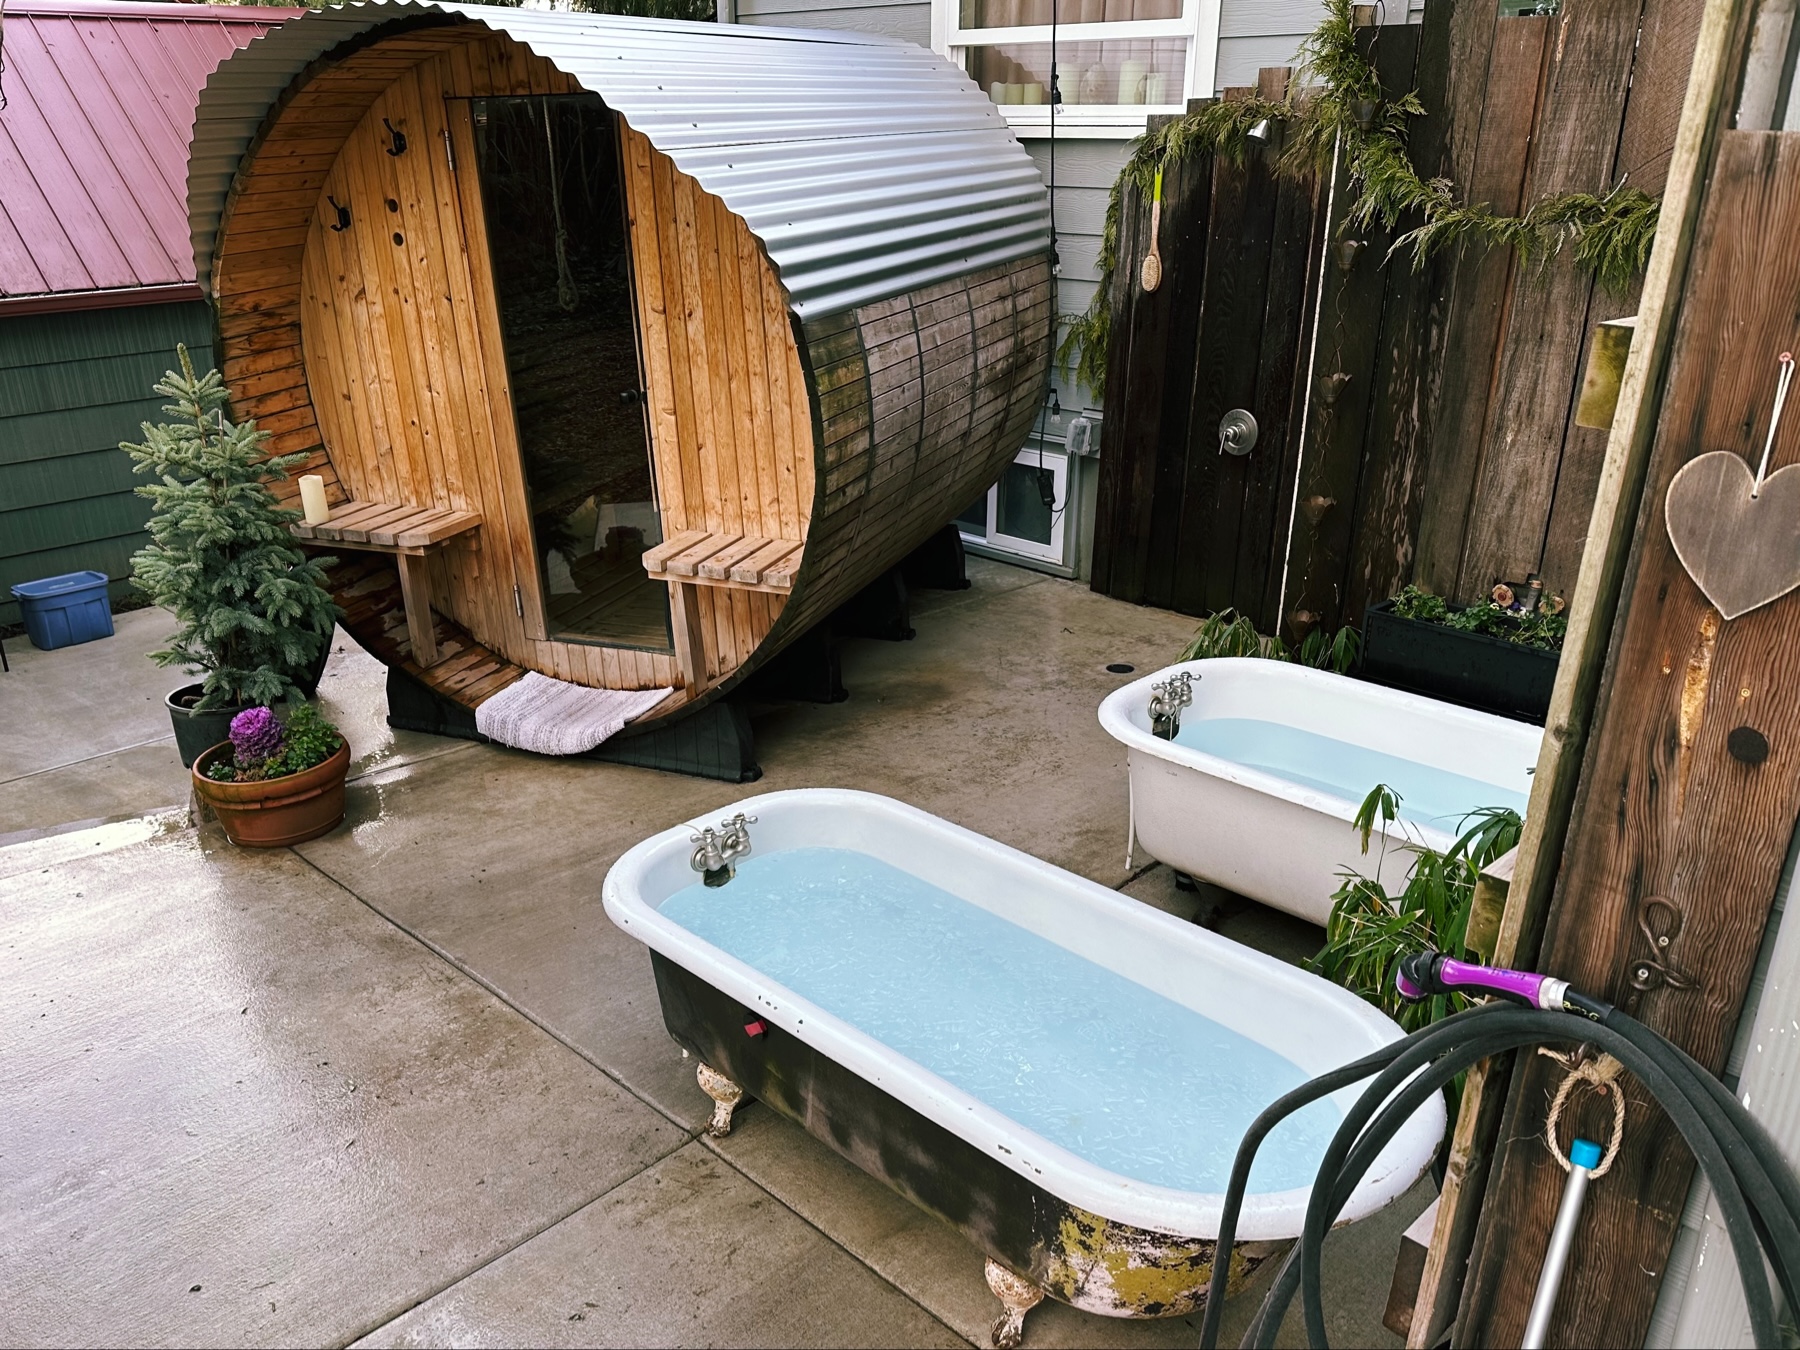 An outdoor space with a sauna and two claw foot bathtubs filled with cold water. One of the tubs has a layer of ice too.